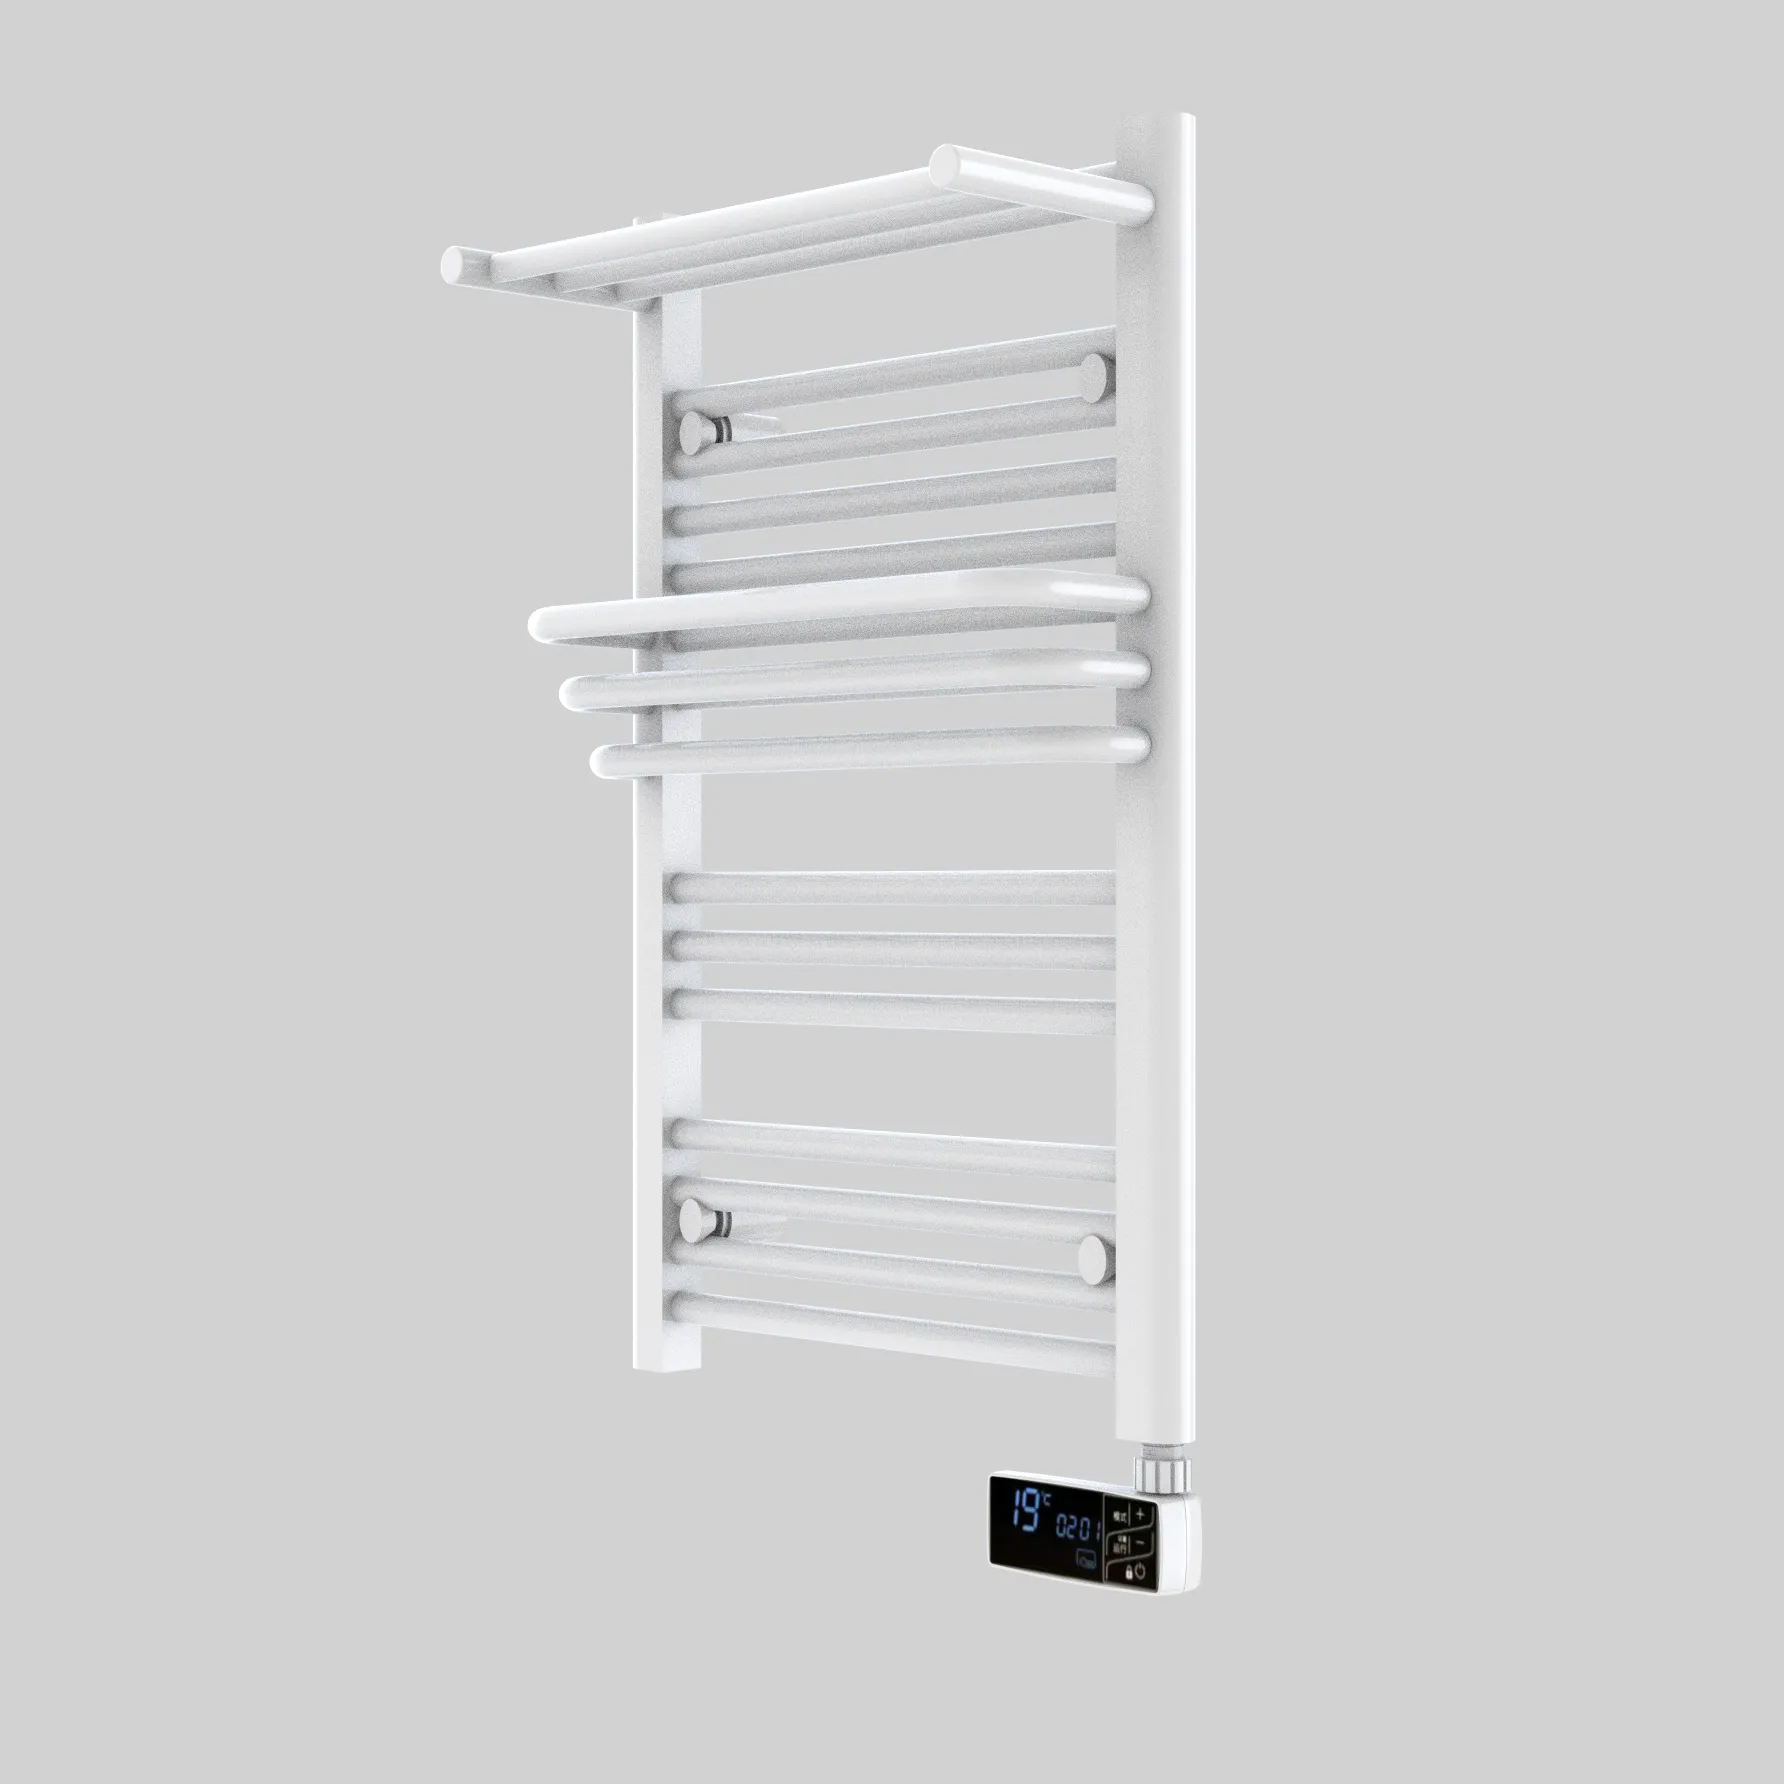 factory competitive price wall mounted dry towel heat warmed towel CE GS ETL electric towel rack for bathroom SPA center hotel